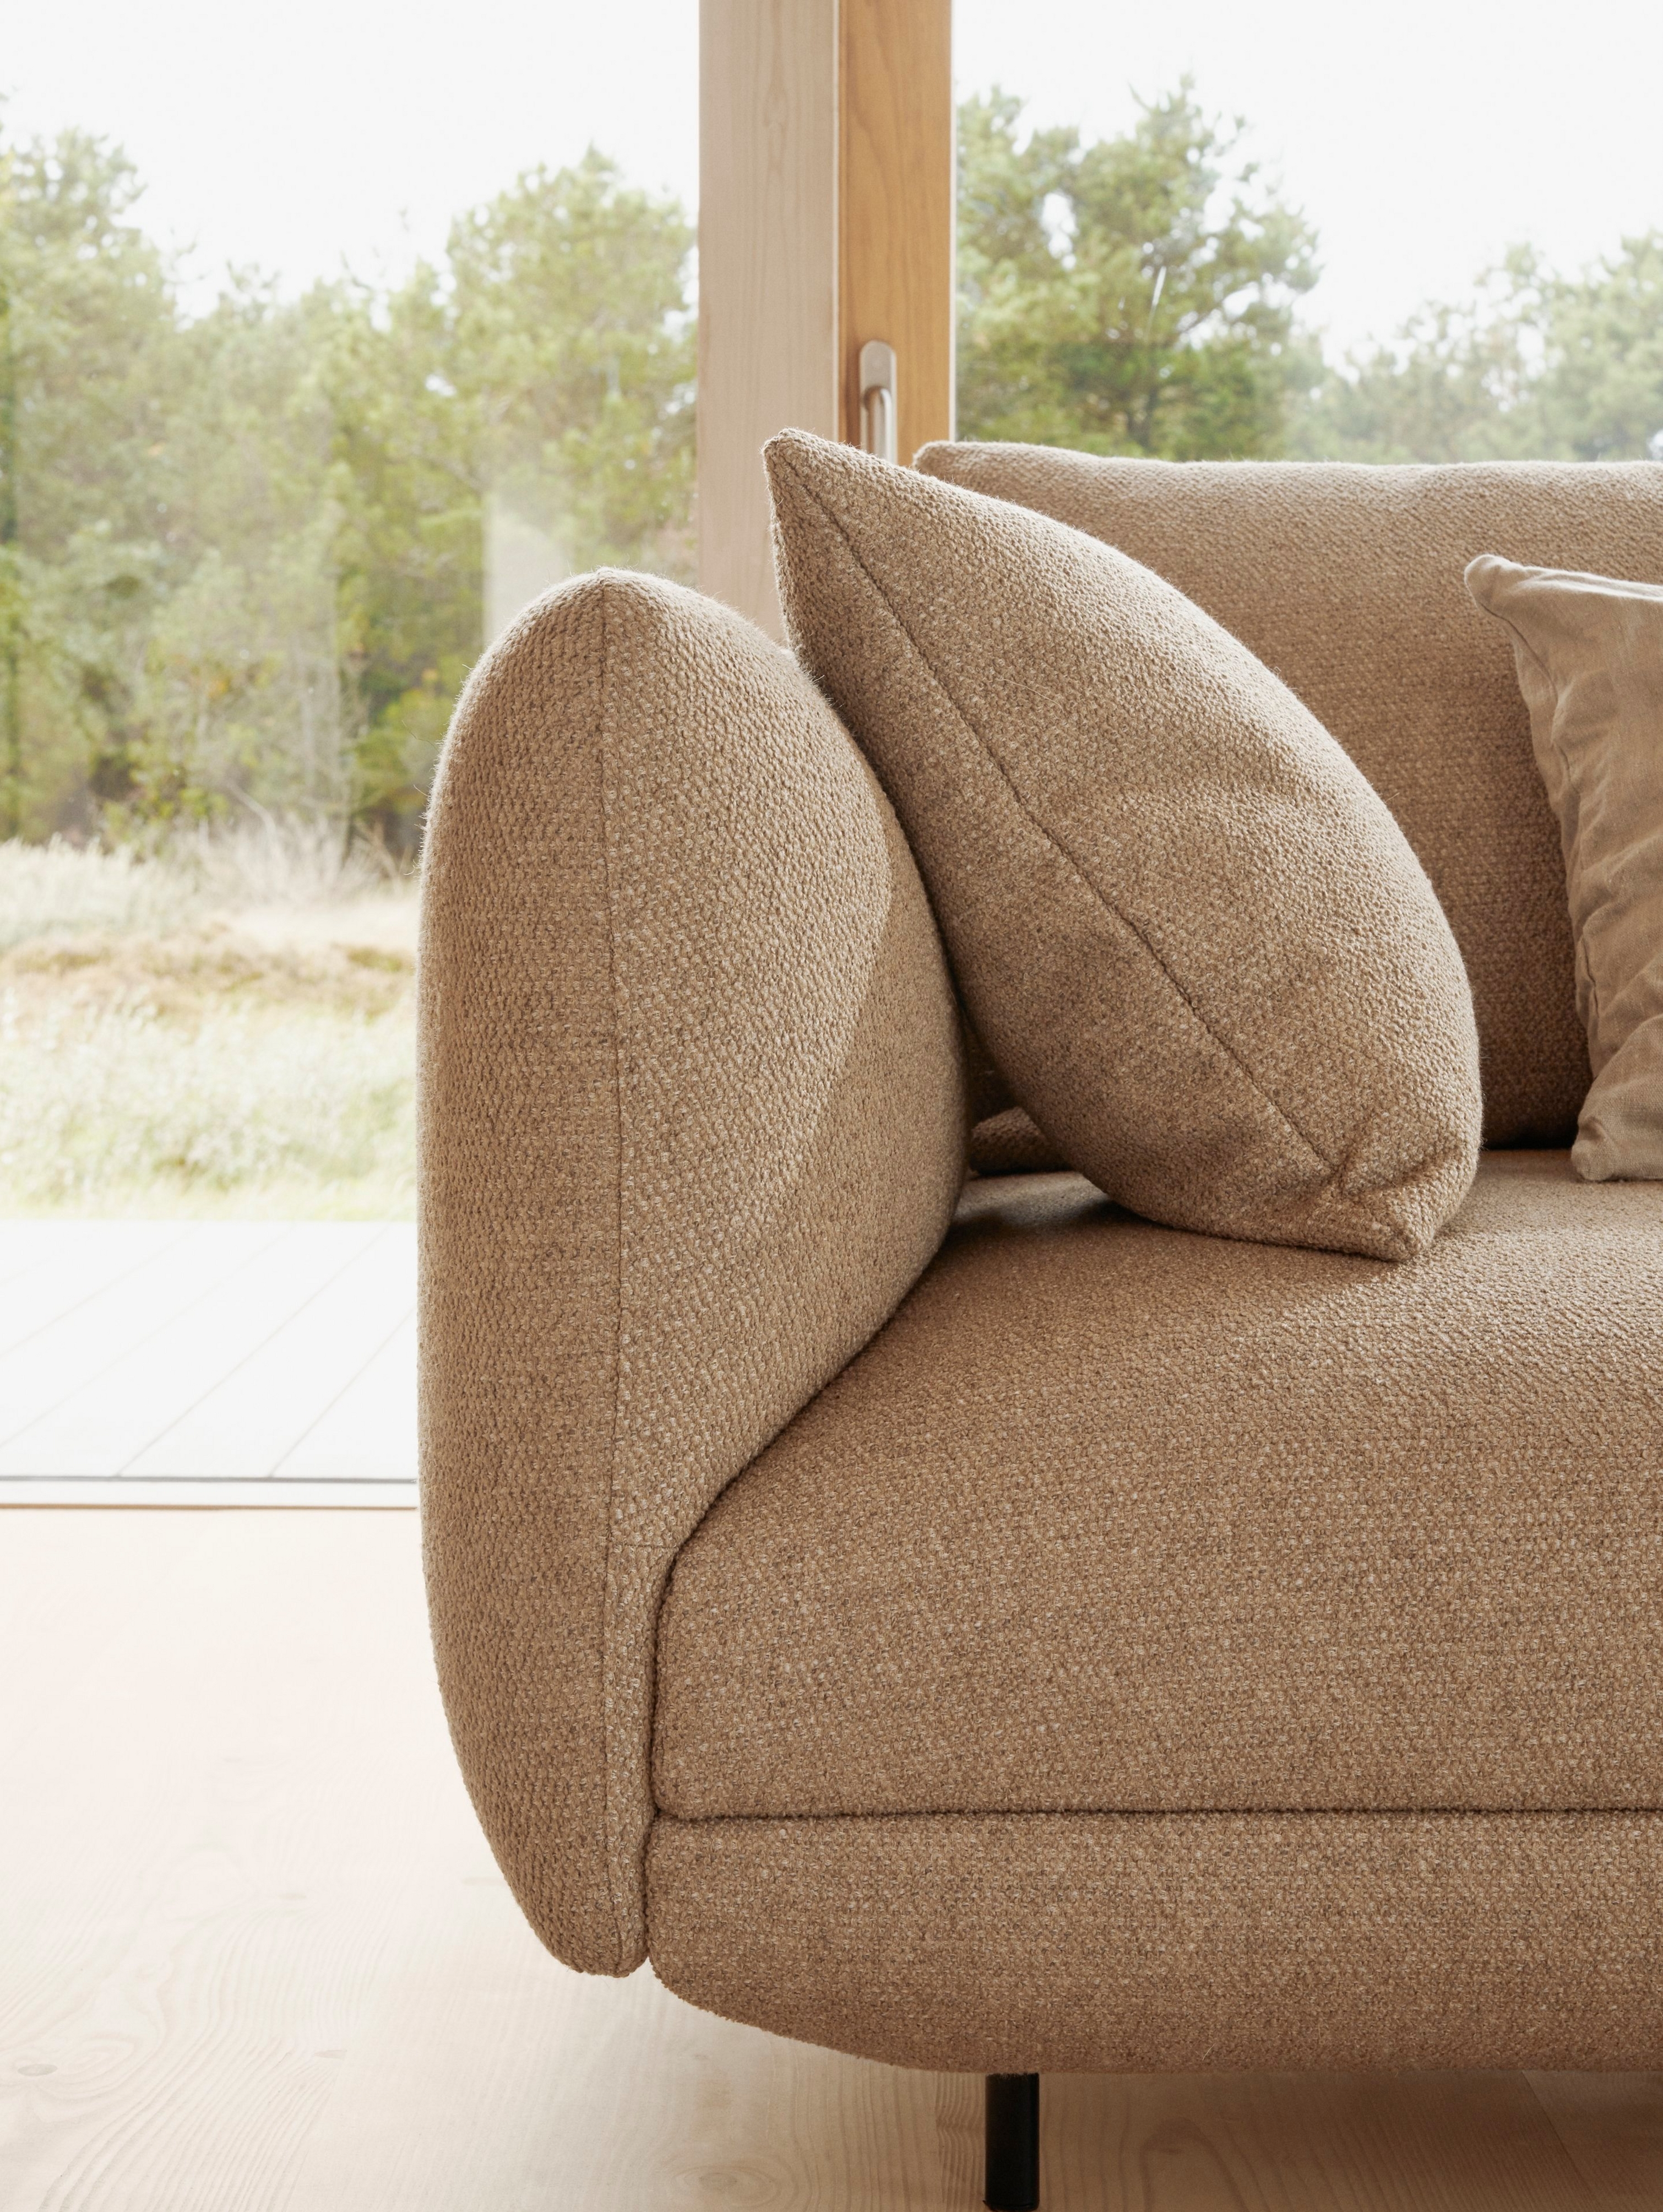 A close-up view of the armrest of the Salamanca sofa in a sunlit living room.